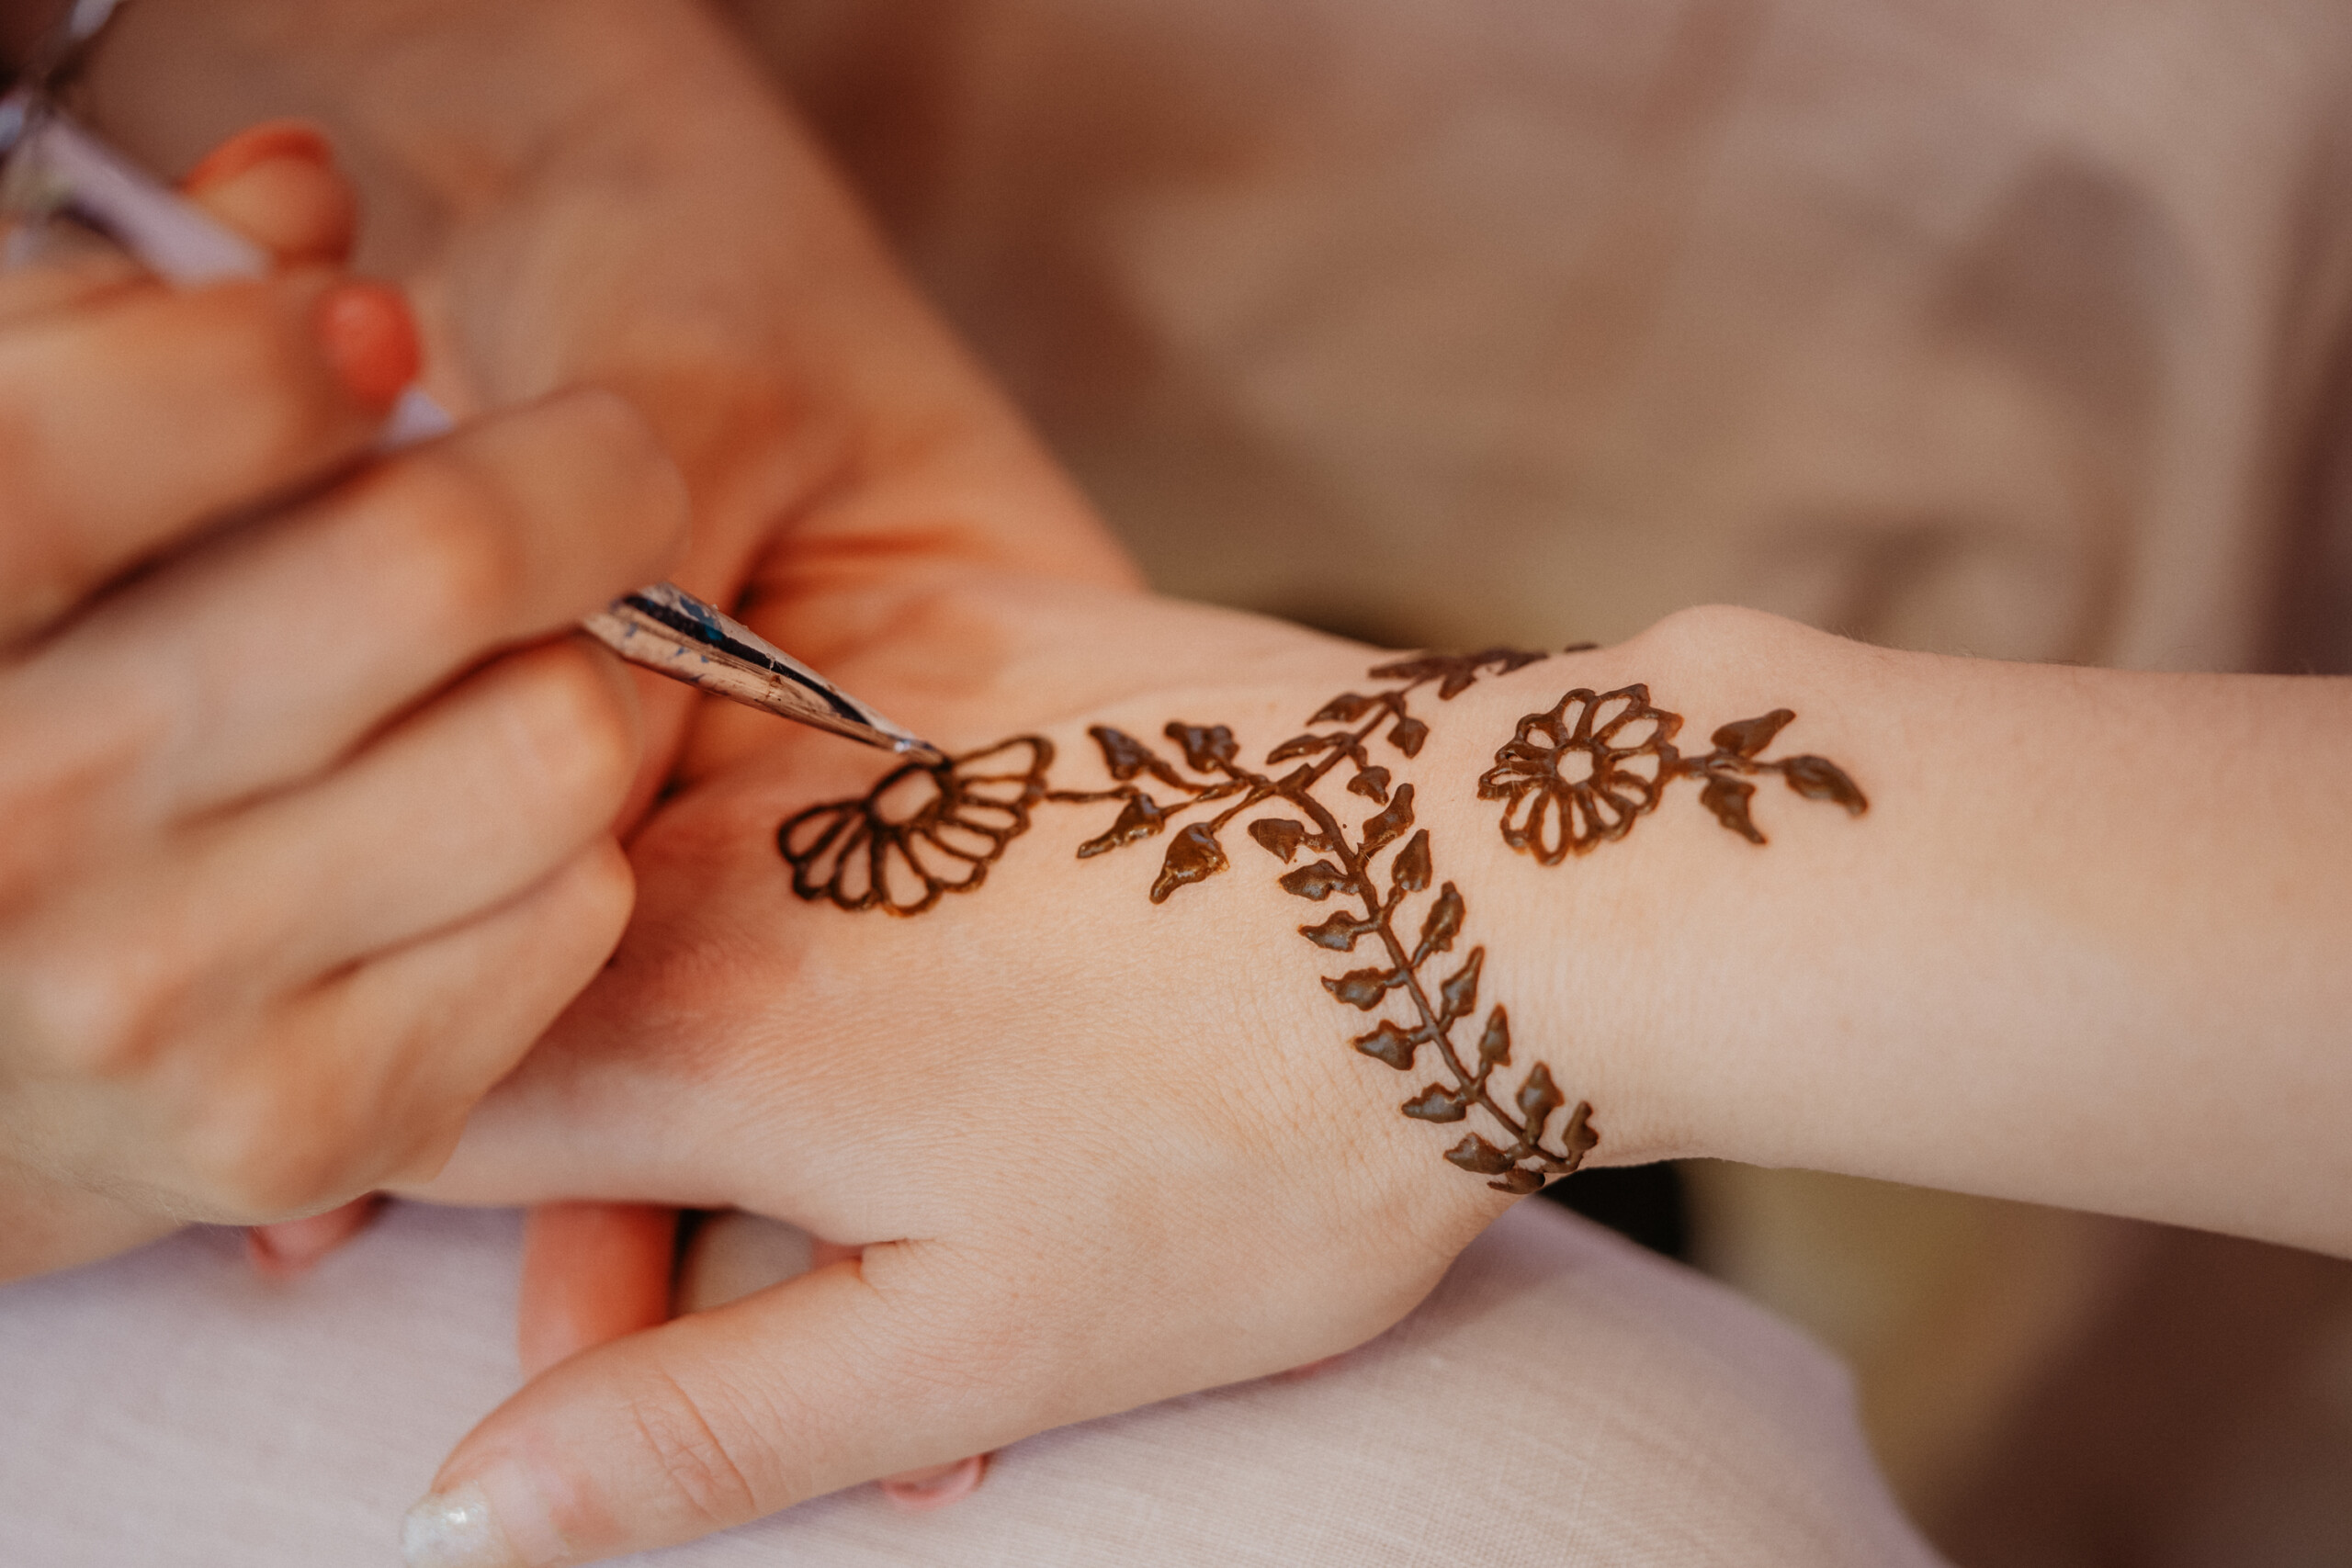 A close-up of two people's hands as one person uses henna to draw a flower design on the other person's hand